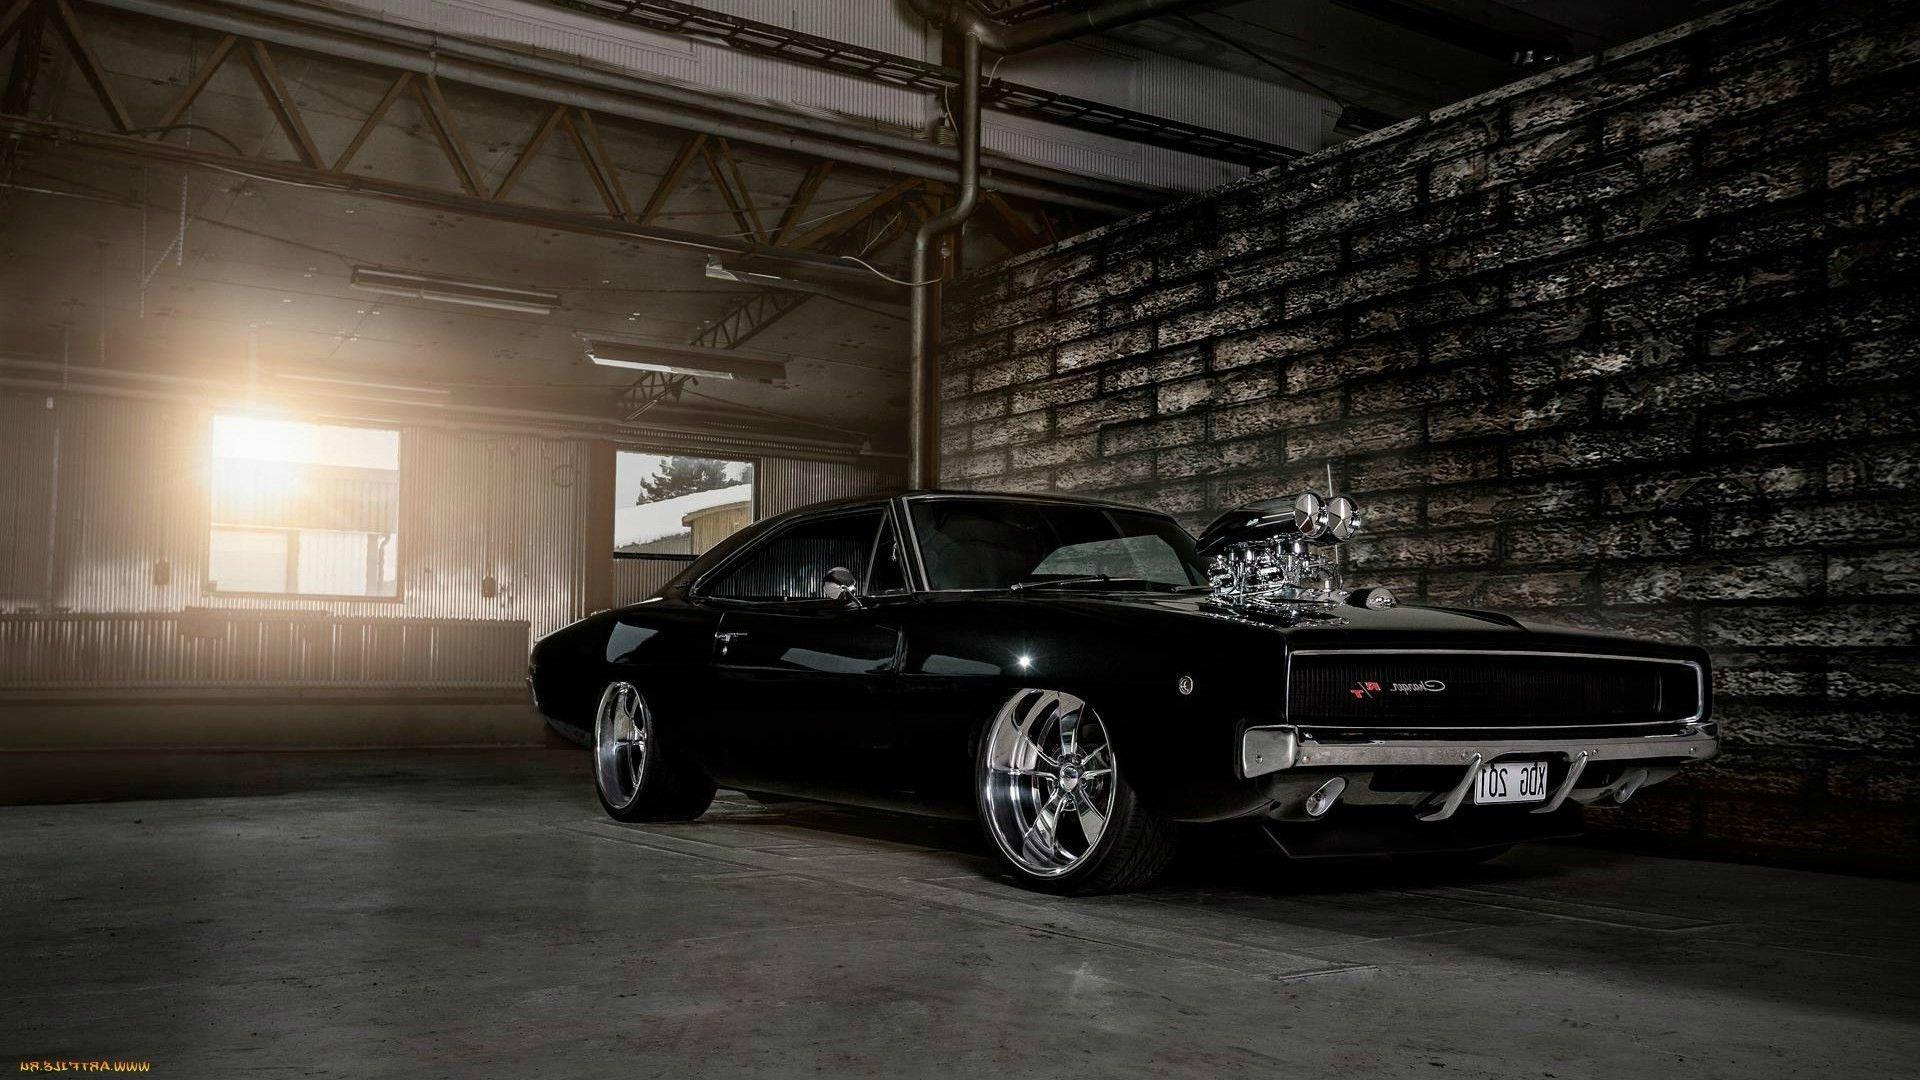 Collection of Dodge Charger Wallpaper on HDWallpaper 2560×1440